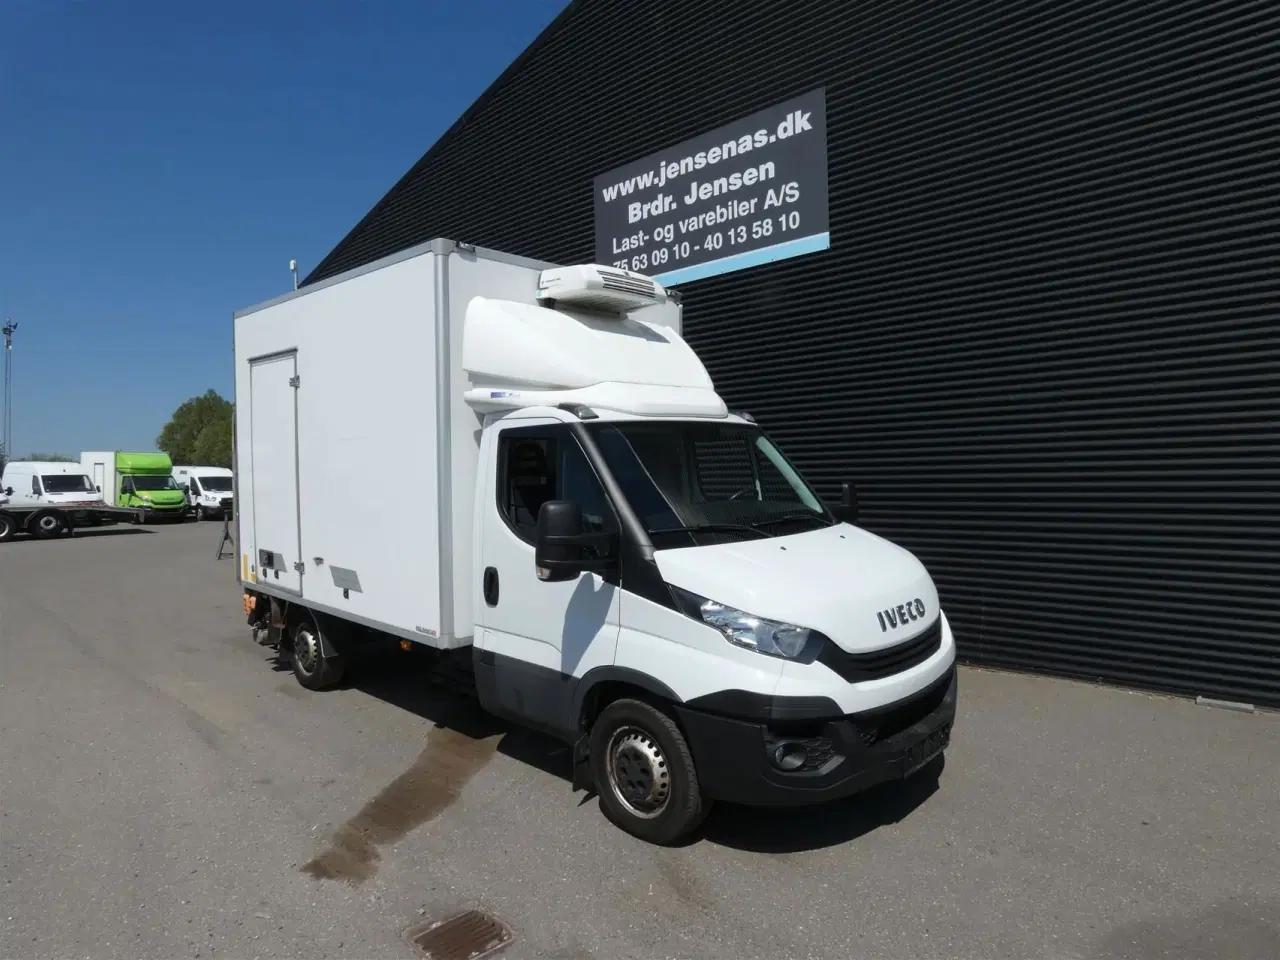 Billede 1 - Iveco Daily 35S18 3750mm 3,0 D 180HK Ladv./Chas. 6g